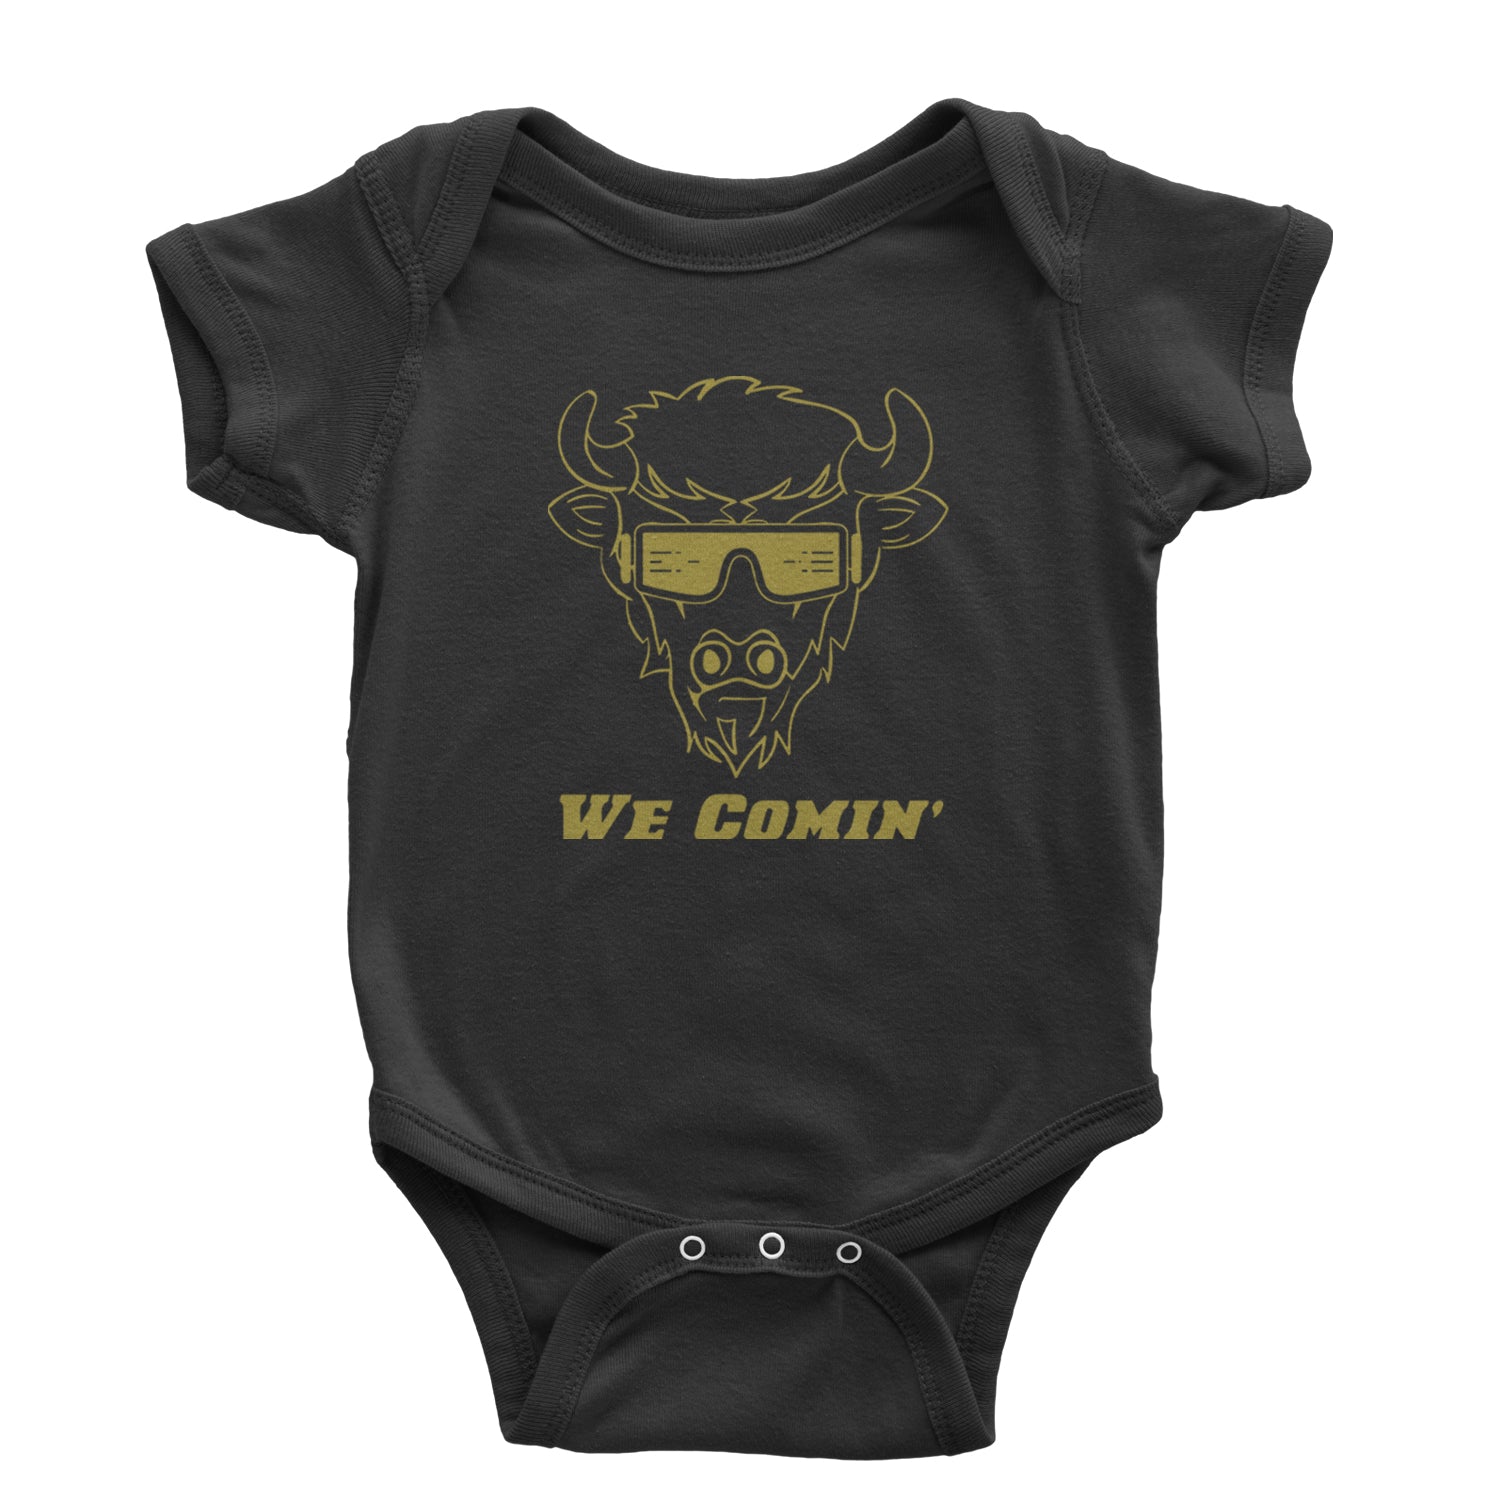 We Coming Coach Prime Colorado Infant One-Piece Romper Bodysuit and Toddler T-shirt